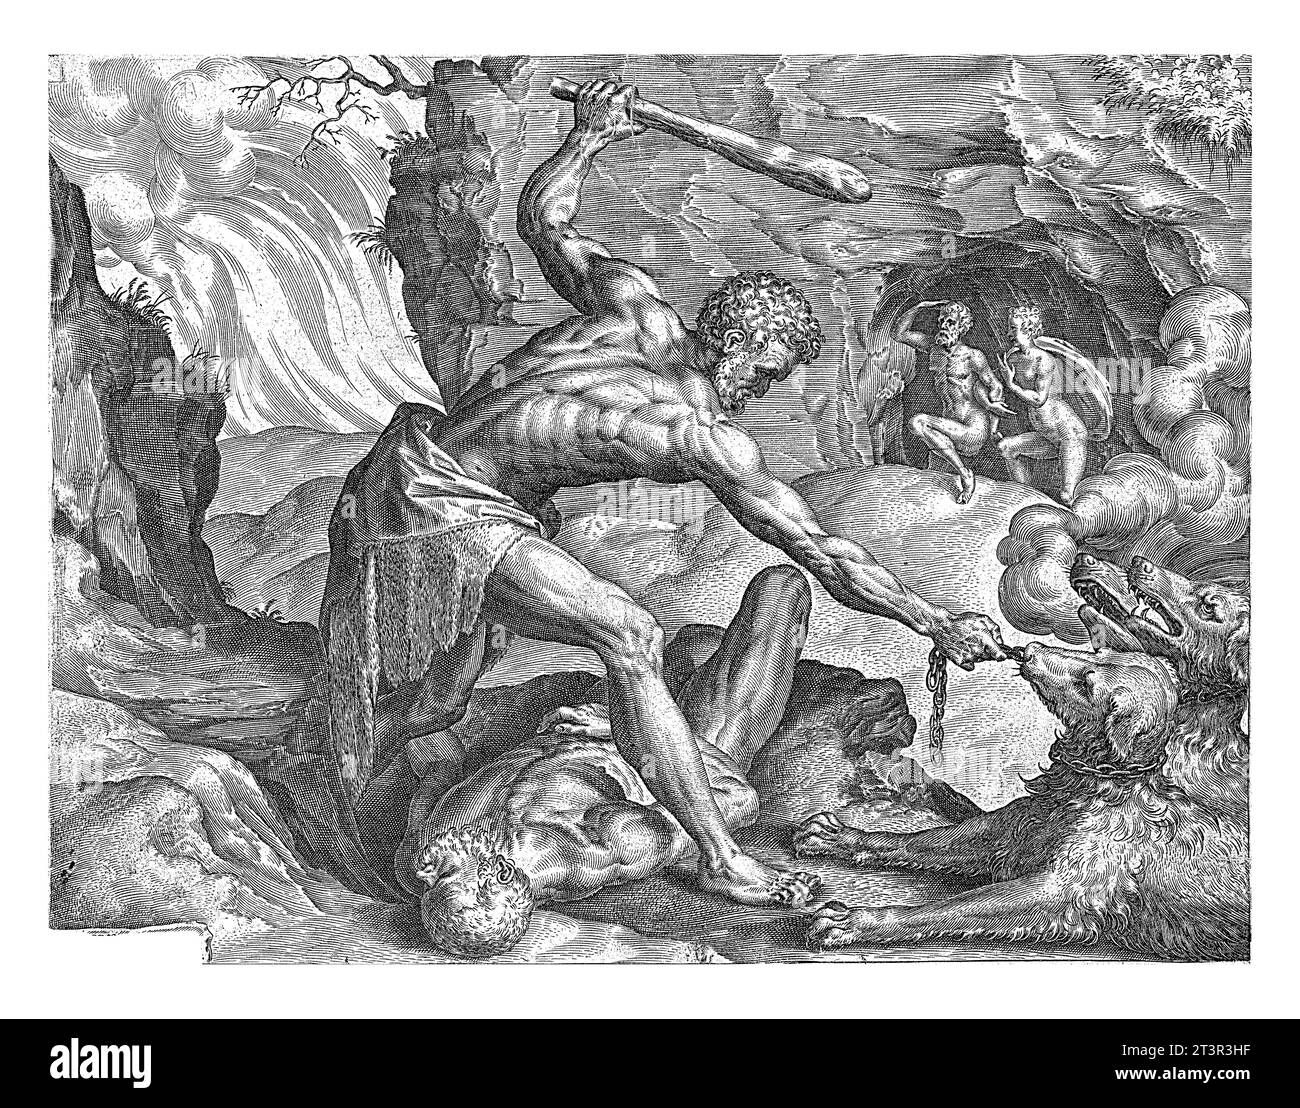 Hercules drags Cerberus out of Hell, Cornelis Cort, after Frans Floris (I), 1563 Hercules takes Cerberus, the three-headed dog who guards the entrance Stock Photo